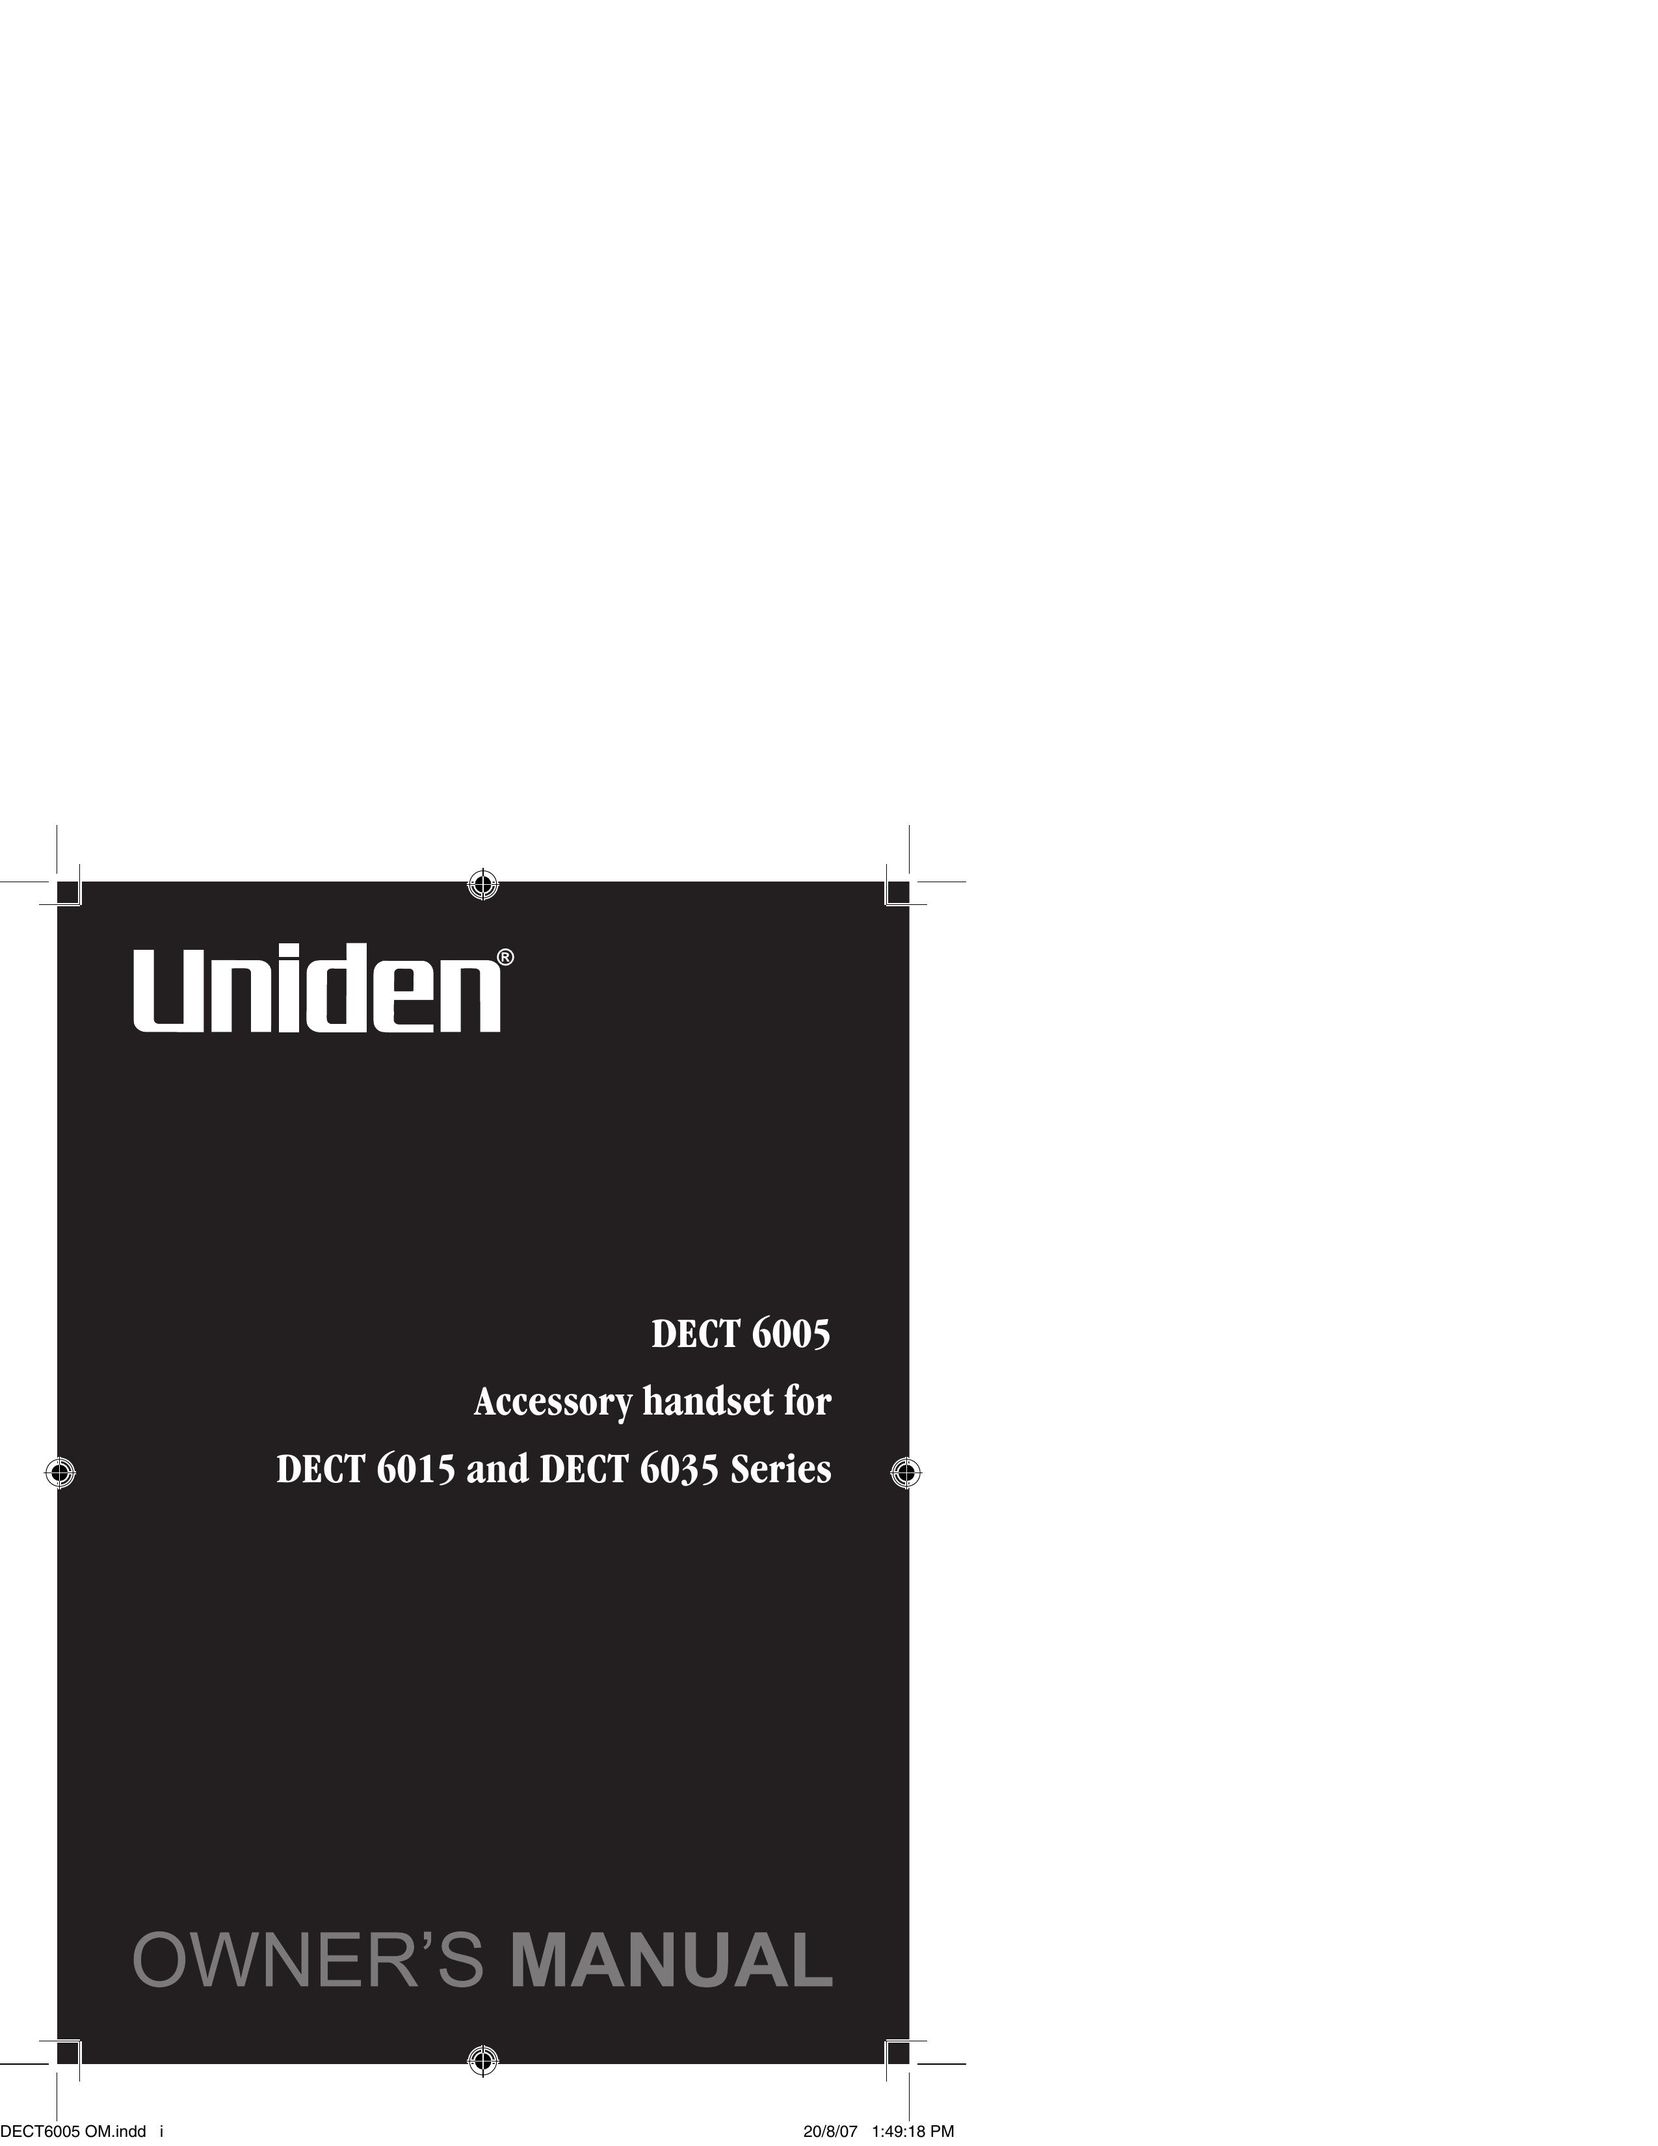 Uniden DECT 6015 Telephone User Manual